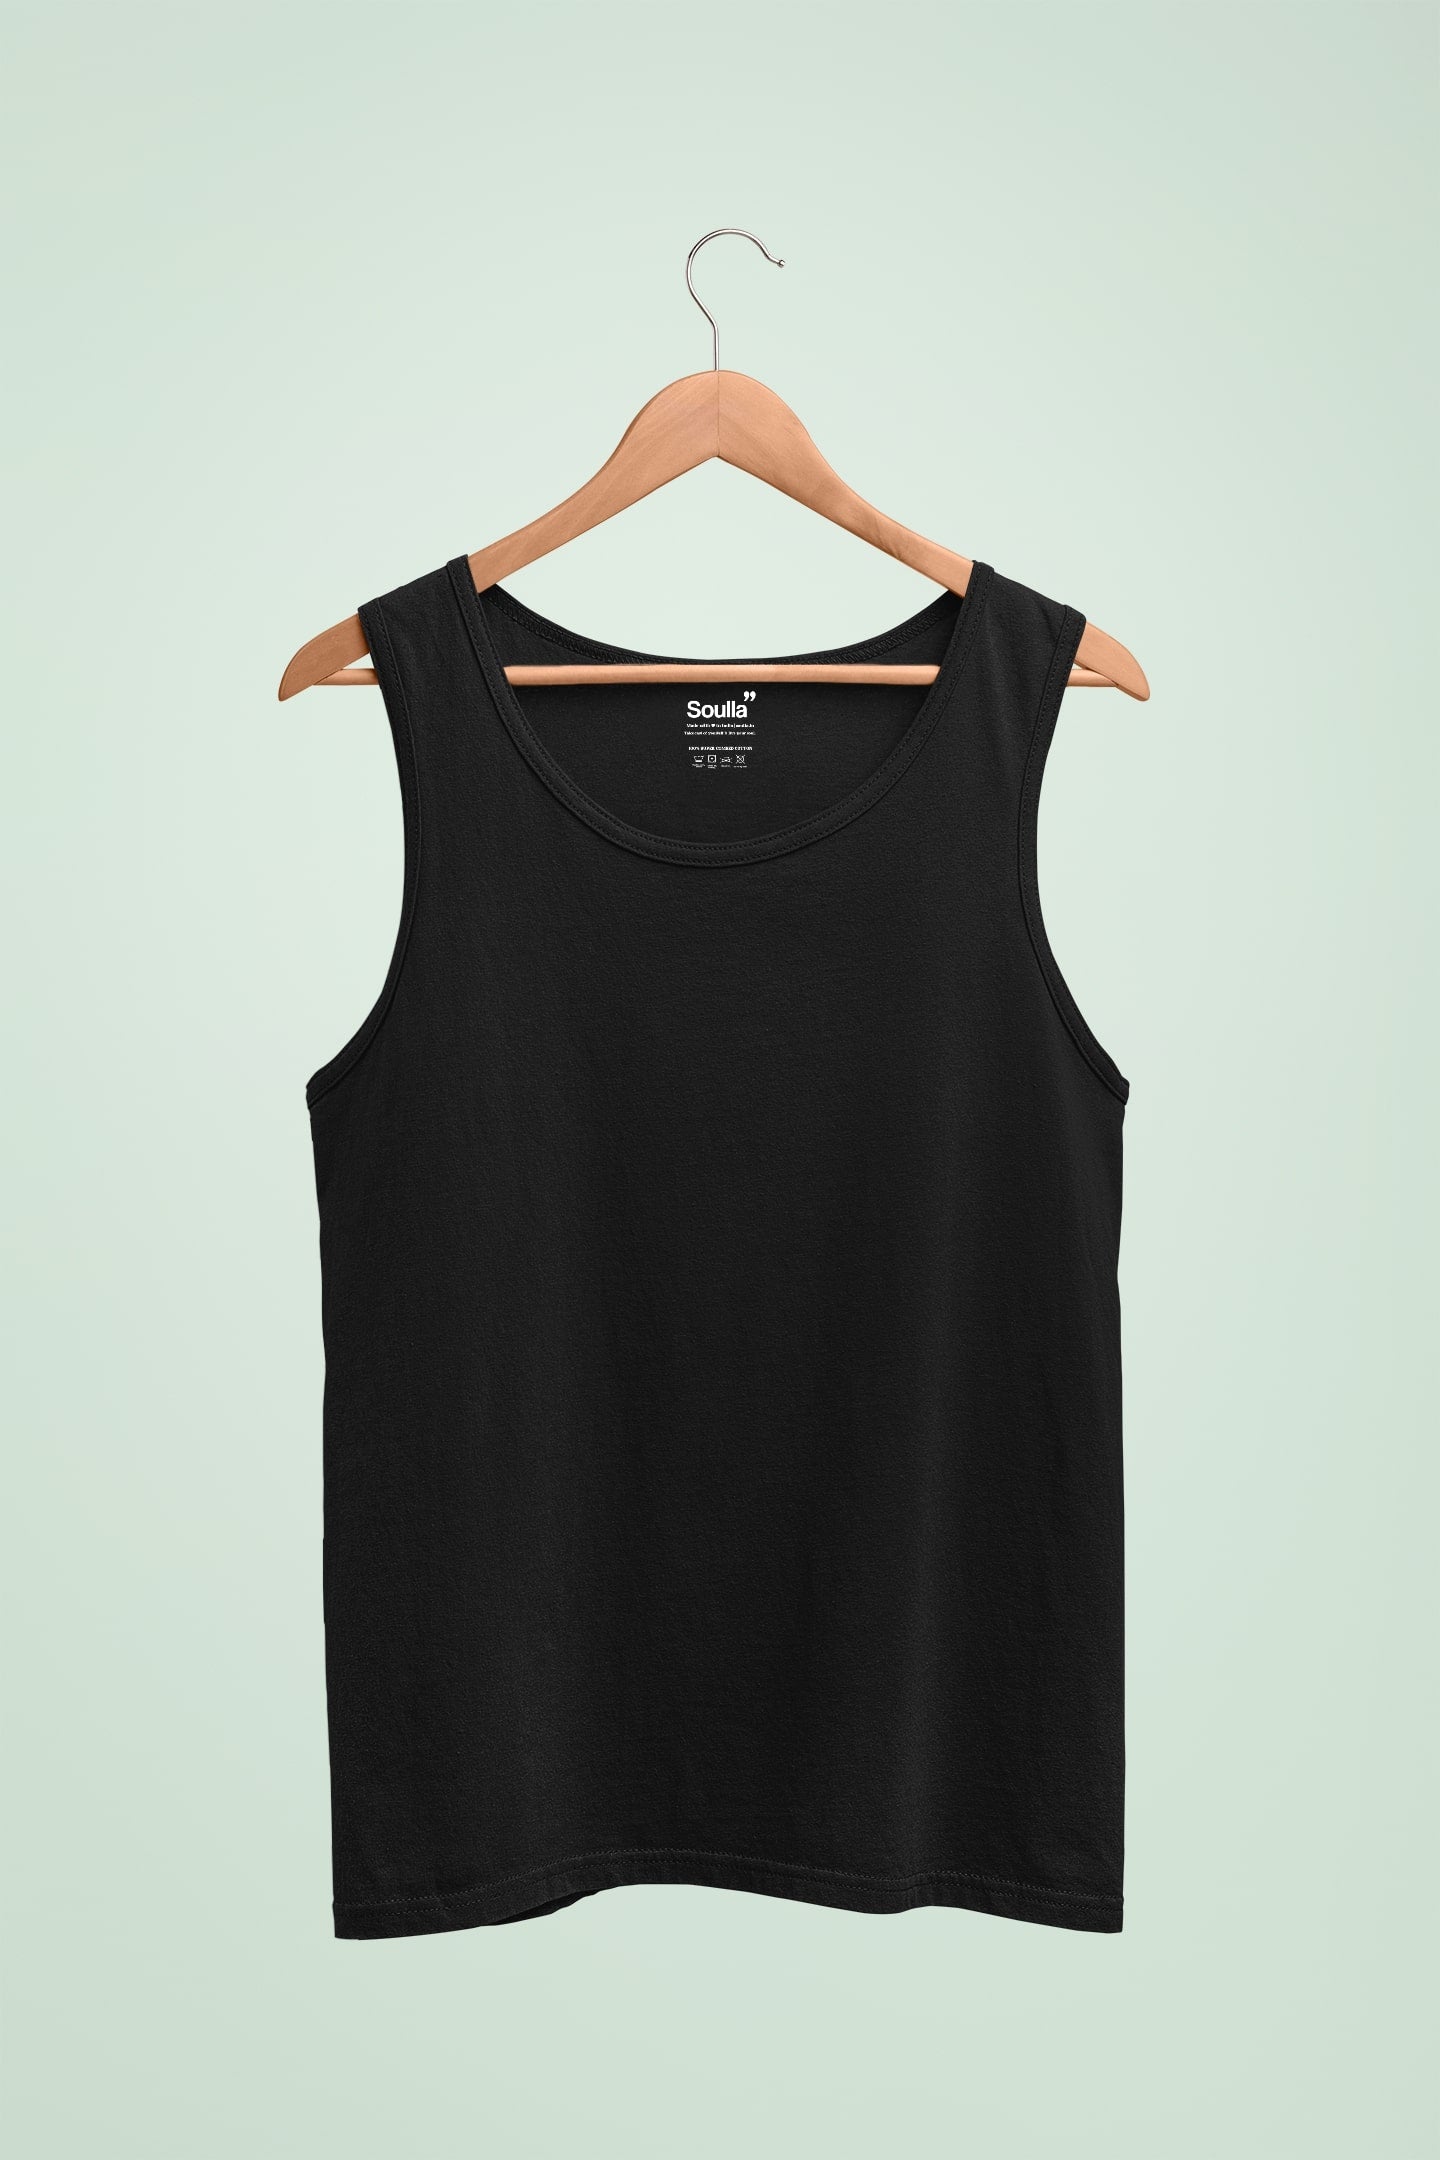 Elevate Your Summer Style with Soulla's Women's Black Tank Top - 100%  Premium Cotton